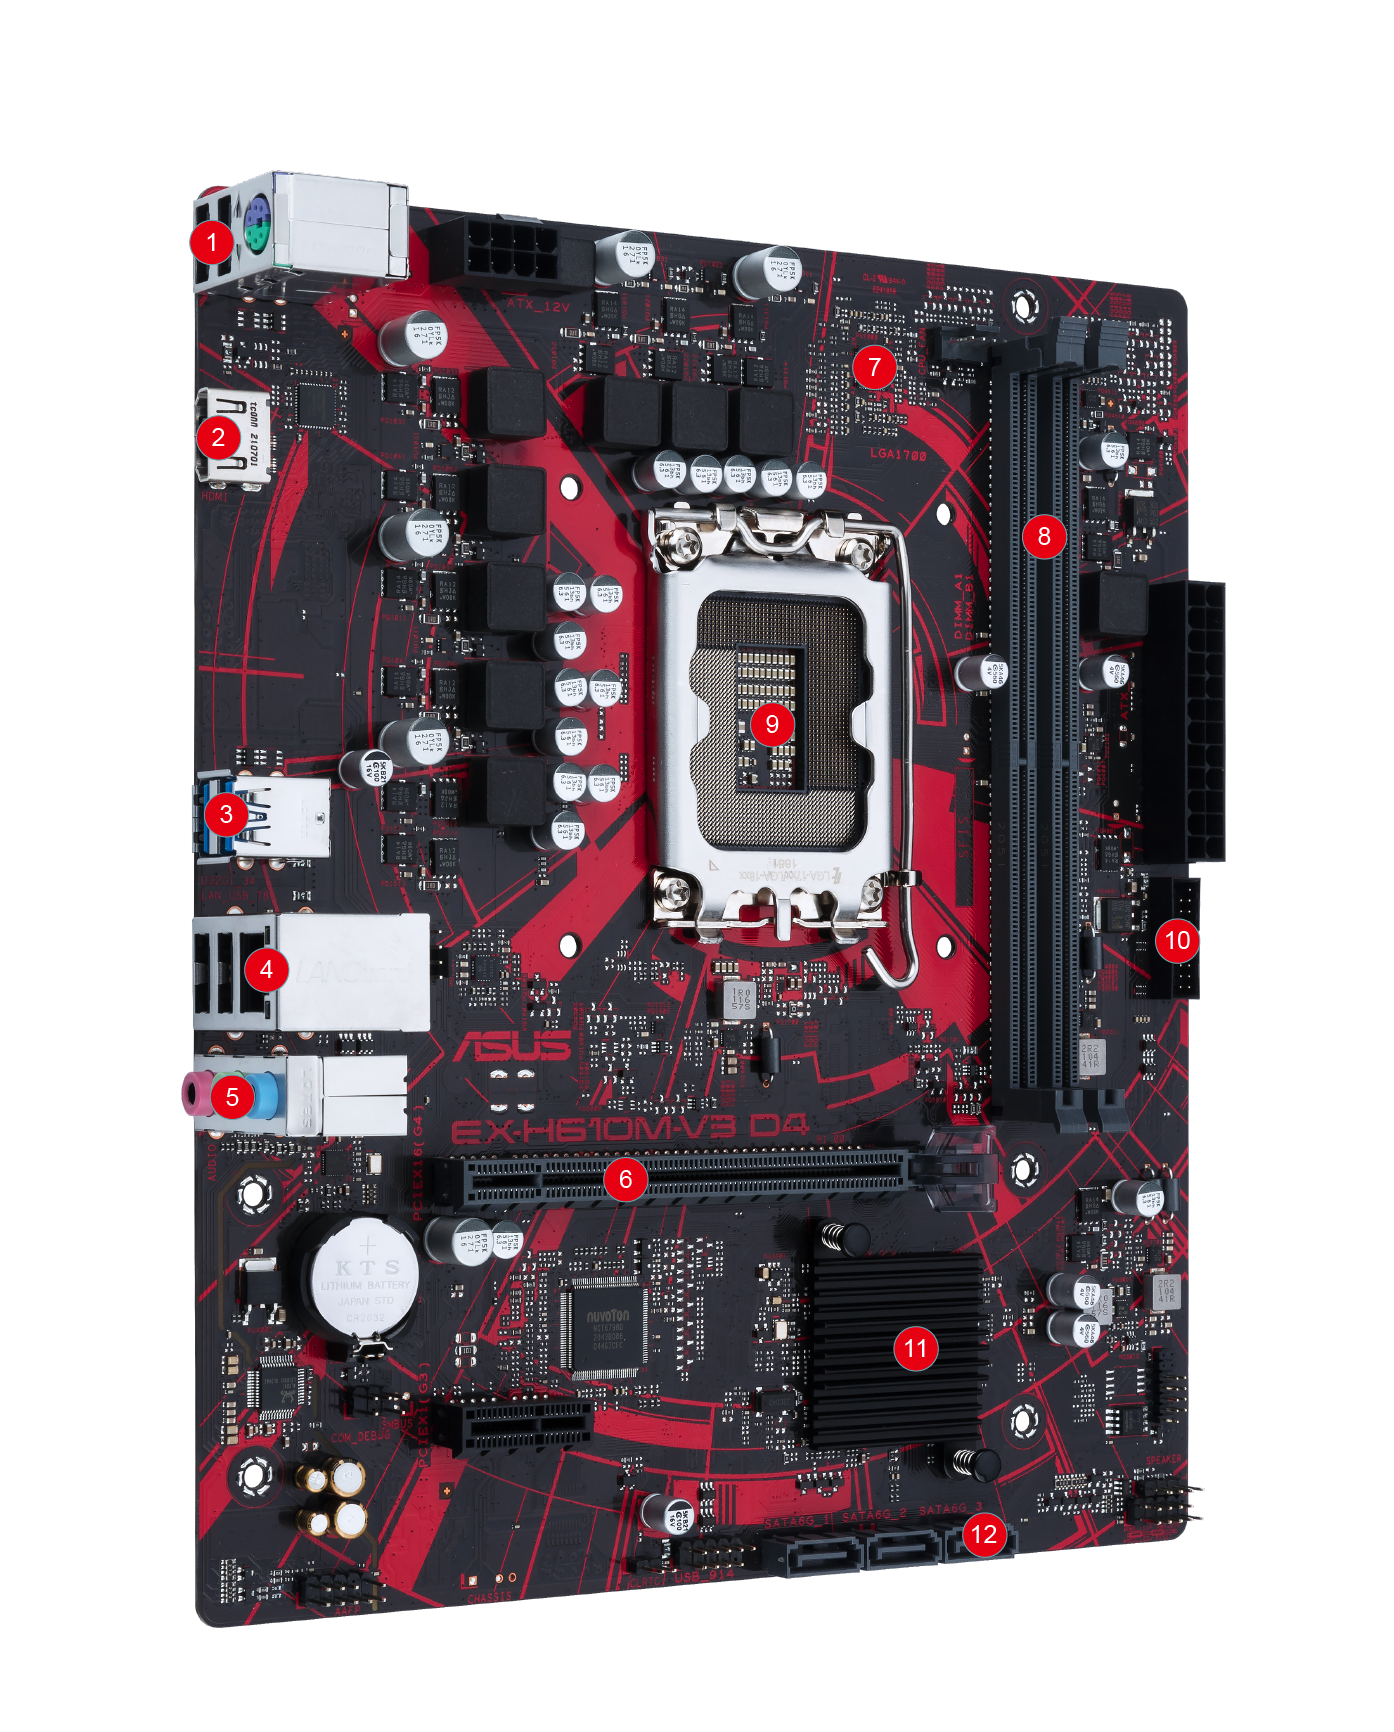 Motherboard layout overview